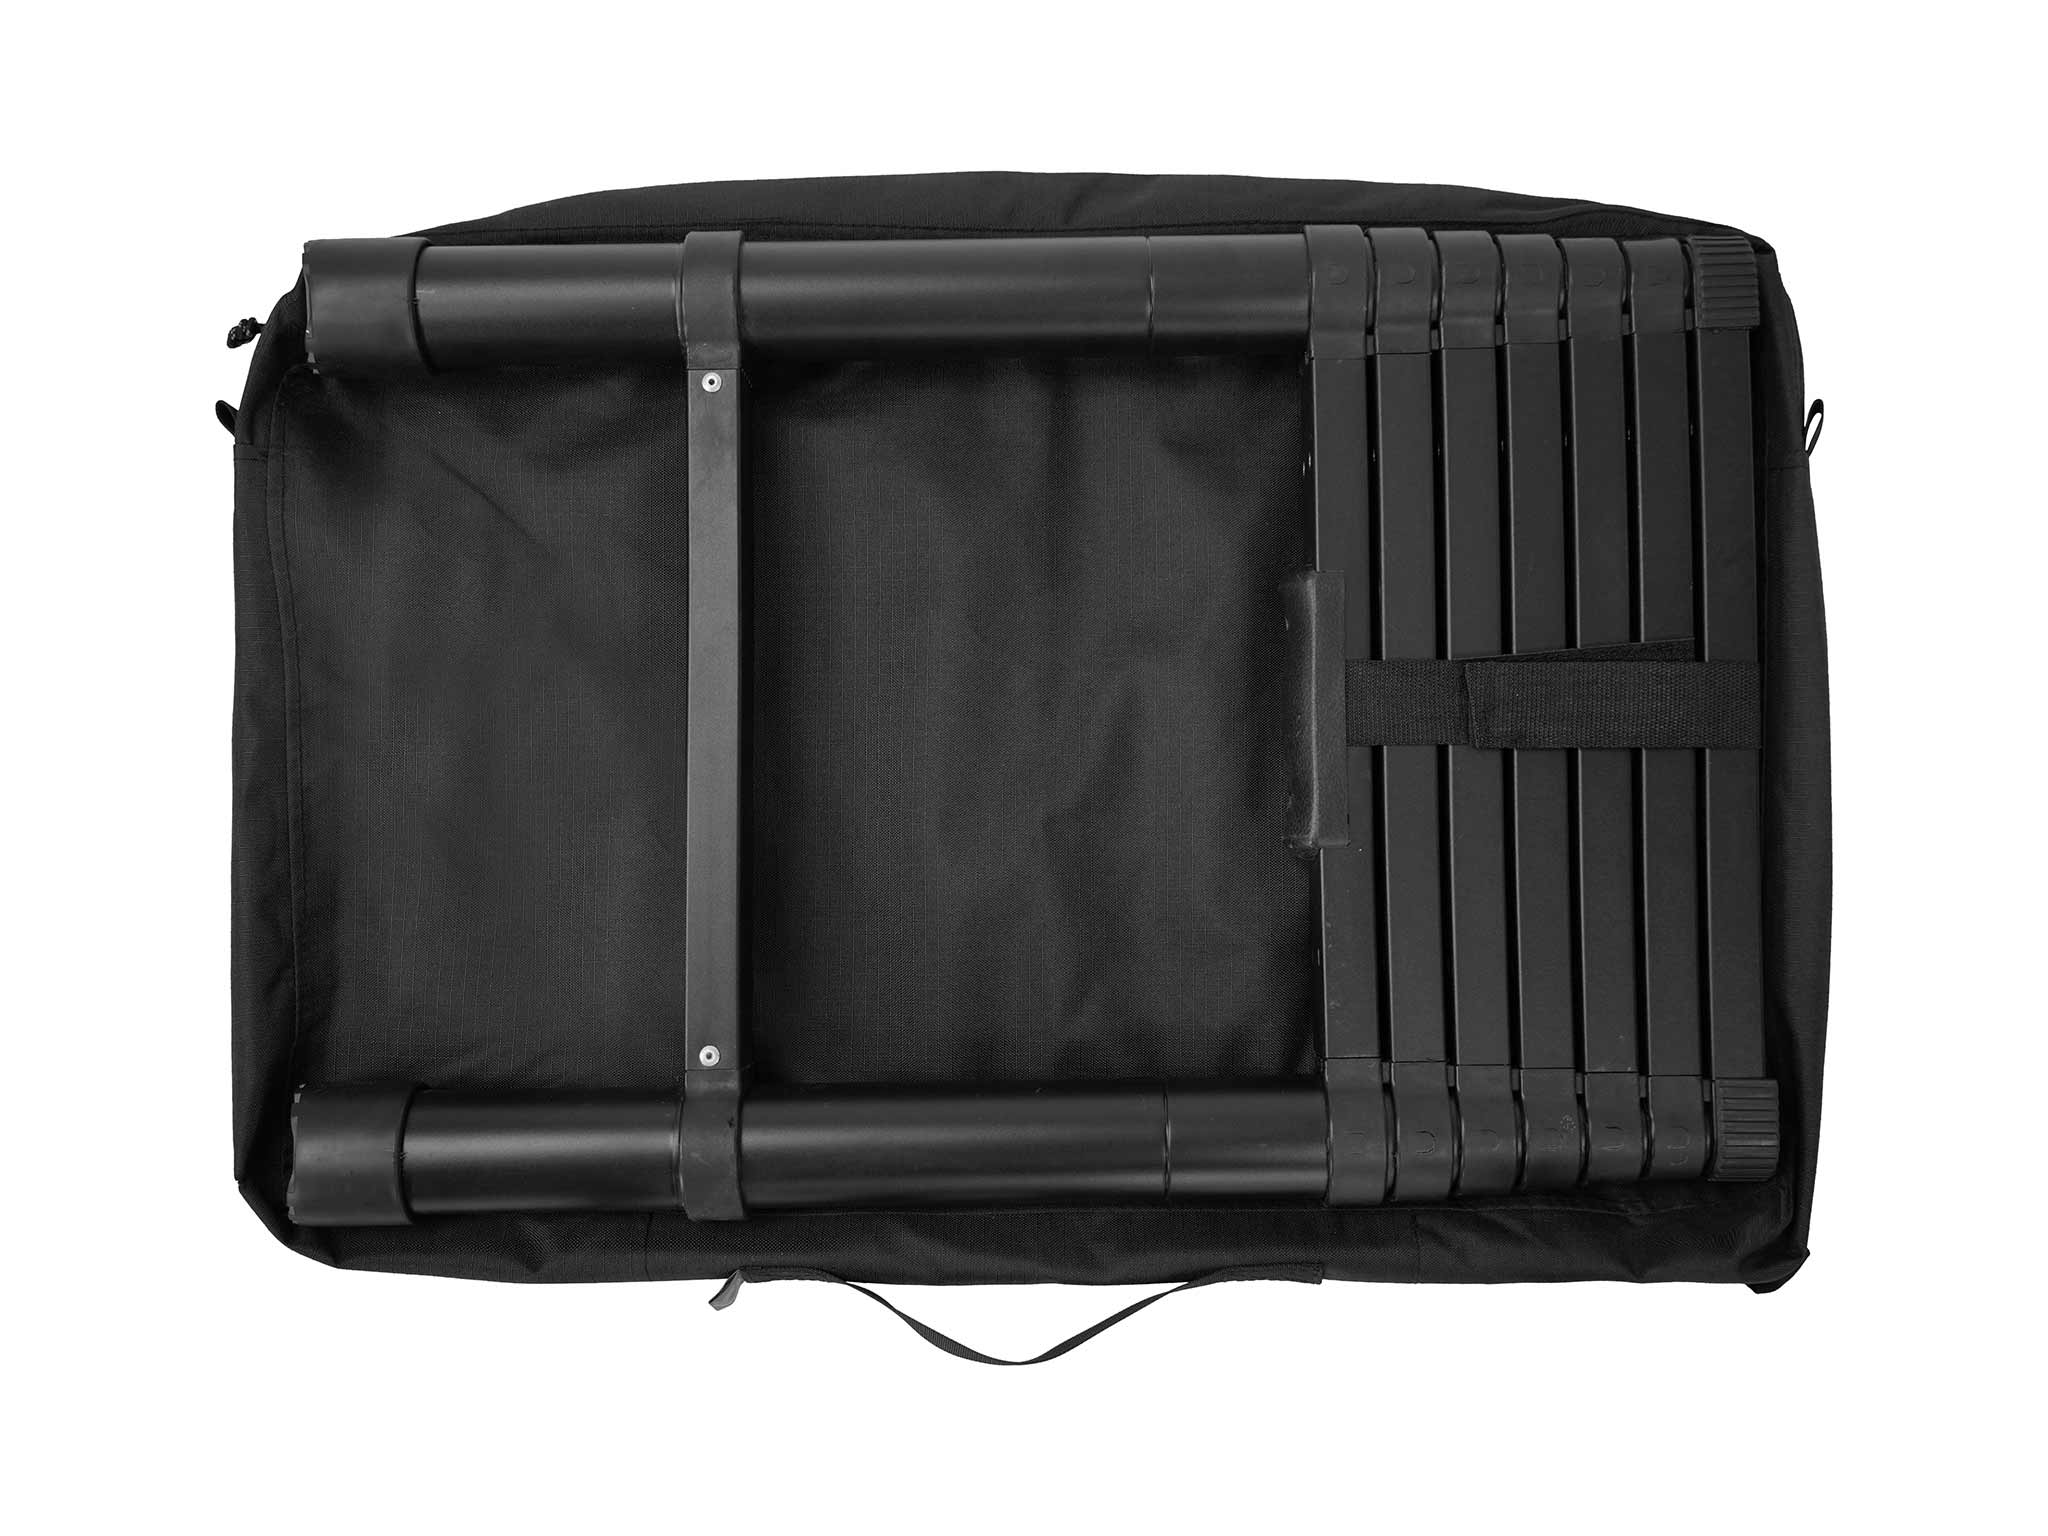 C6 OUTDOOR REV LADDER CARRYING CASE